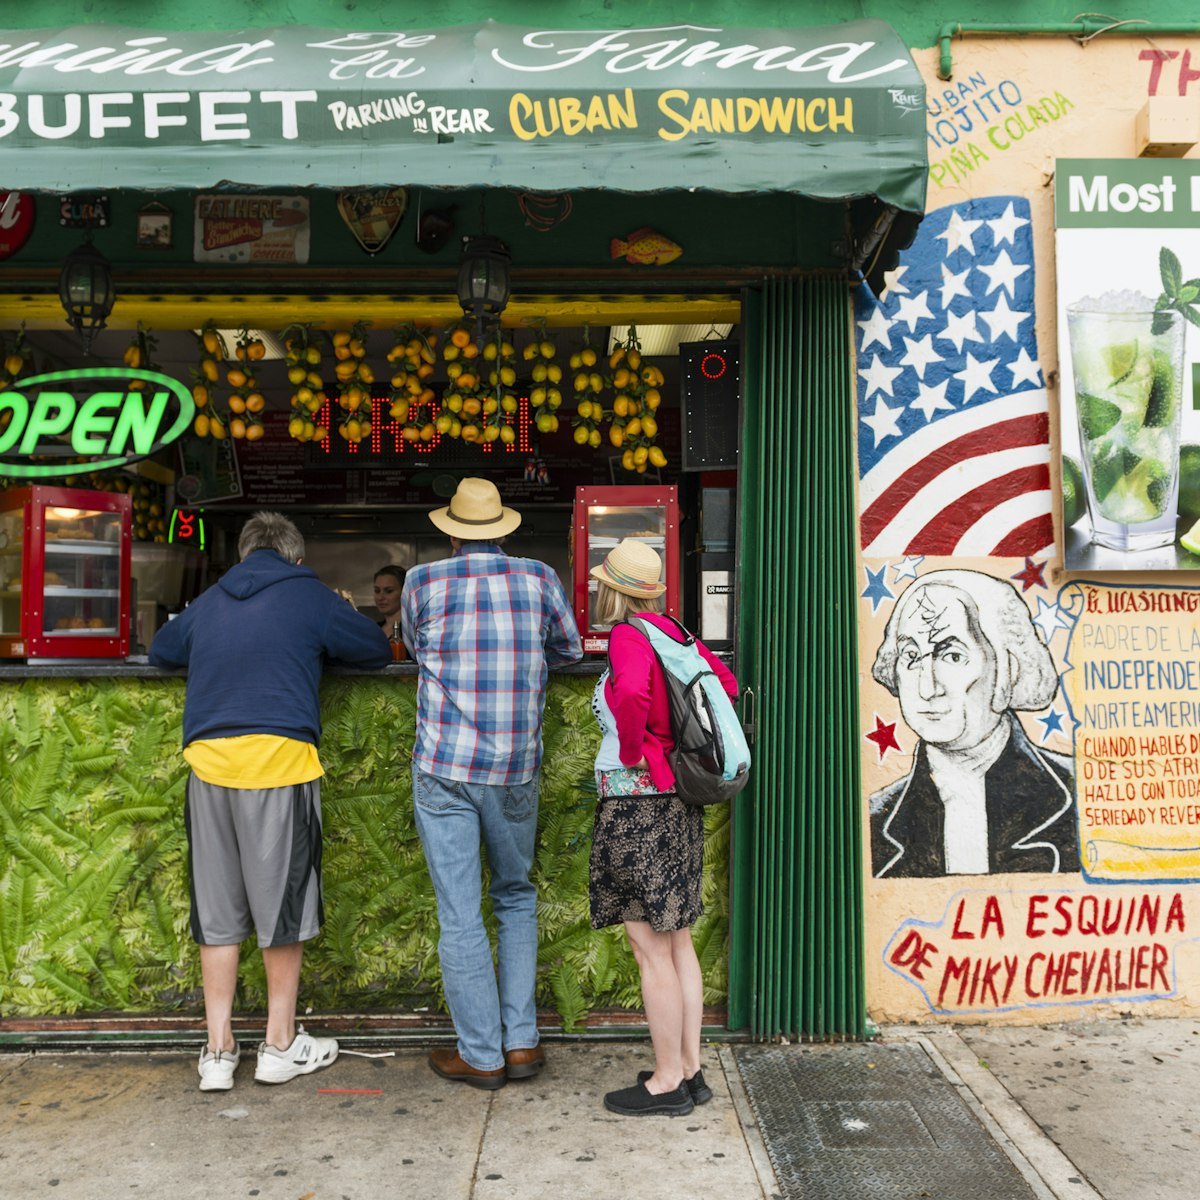 Miami, United States - March 21, 2016: Tourists stand to order from the open air countertop of a restaurant advertising Cuban food and drinks on historic Calle Ocho in Little Havana.